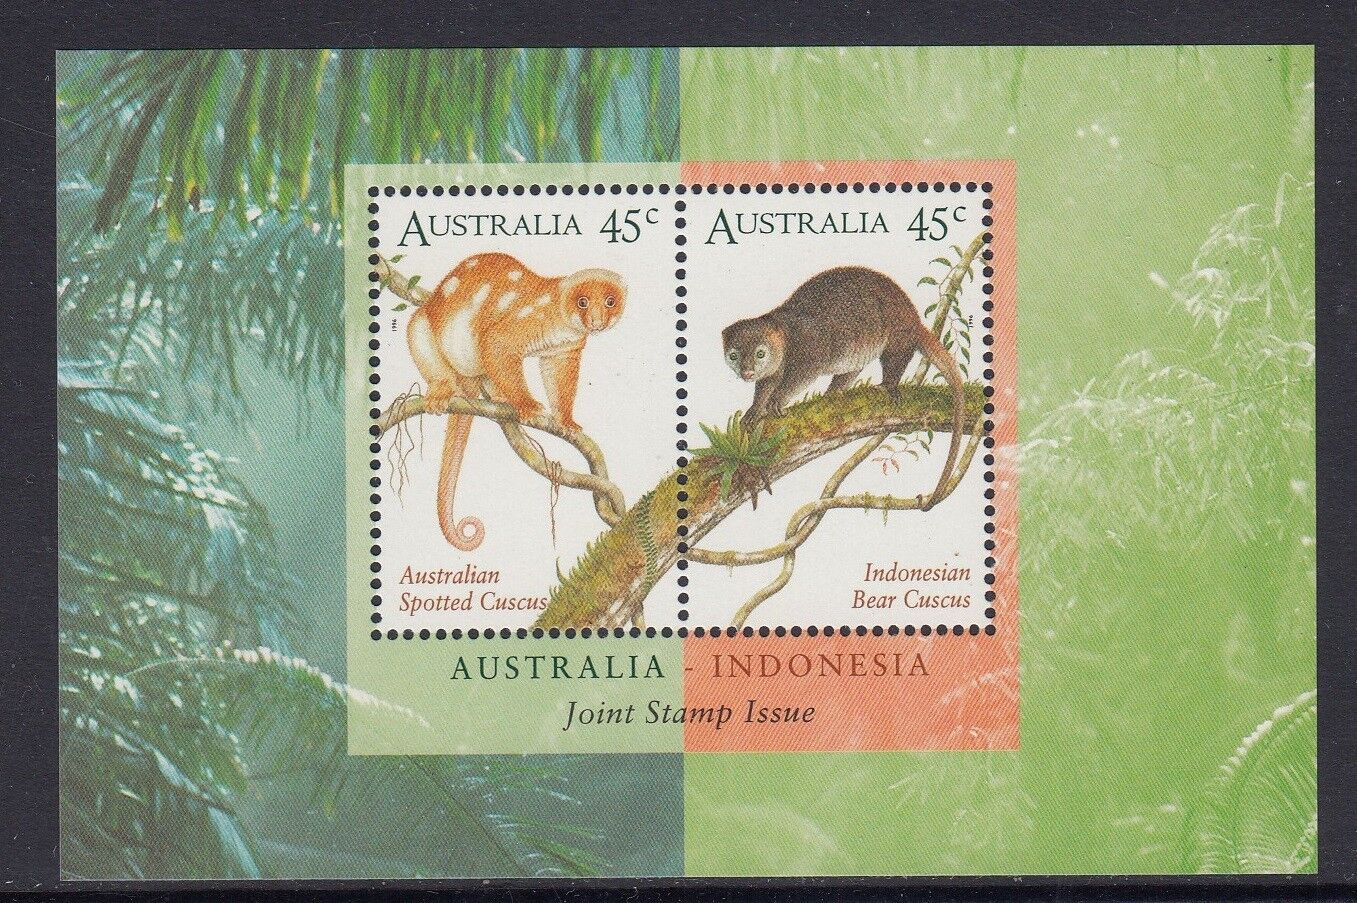 Australia 1996 Weekly update AUSTRALIA & INDONESIA CUSCUSES MNH 25% OFF Issue P Joint